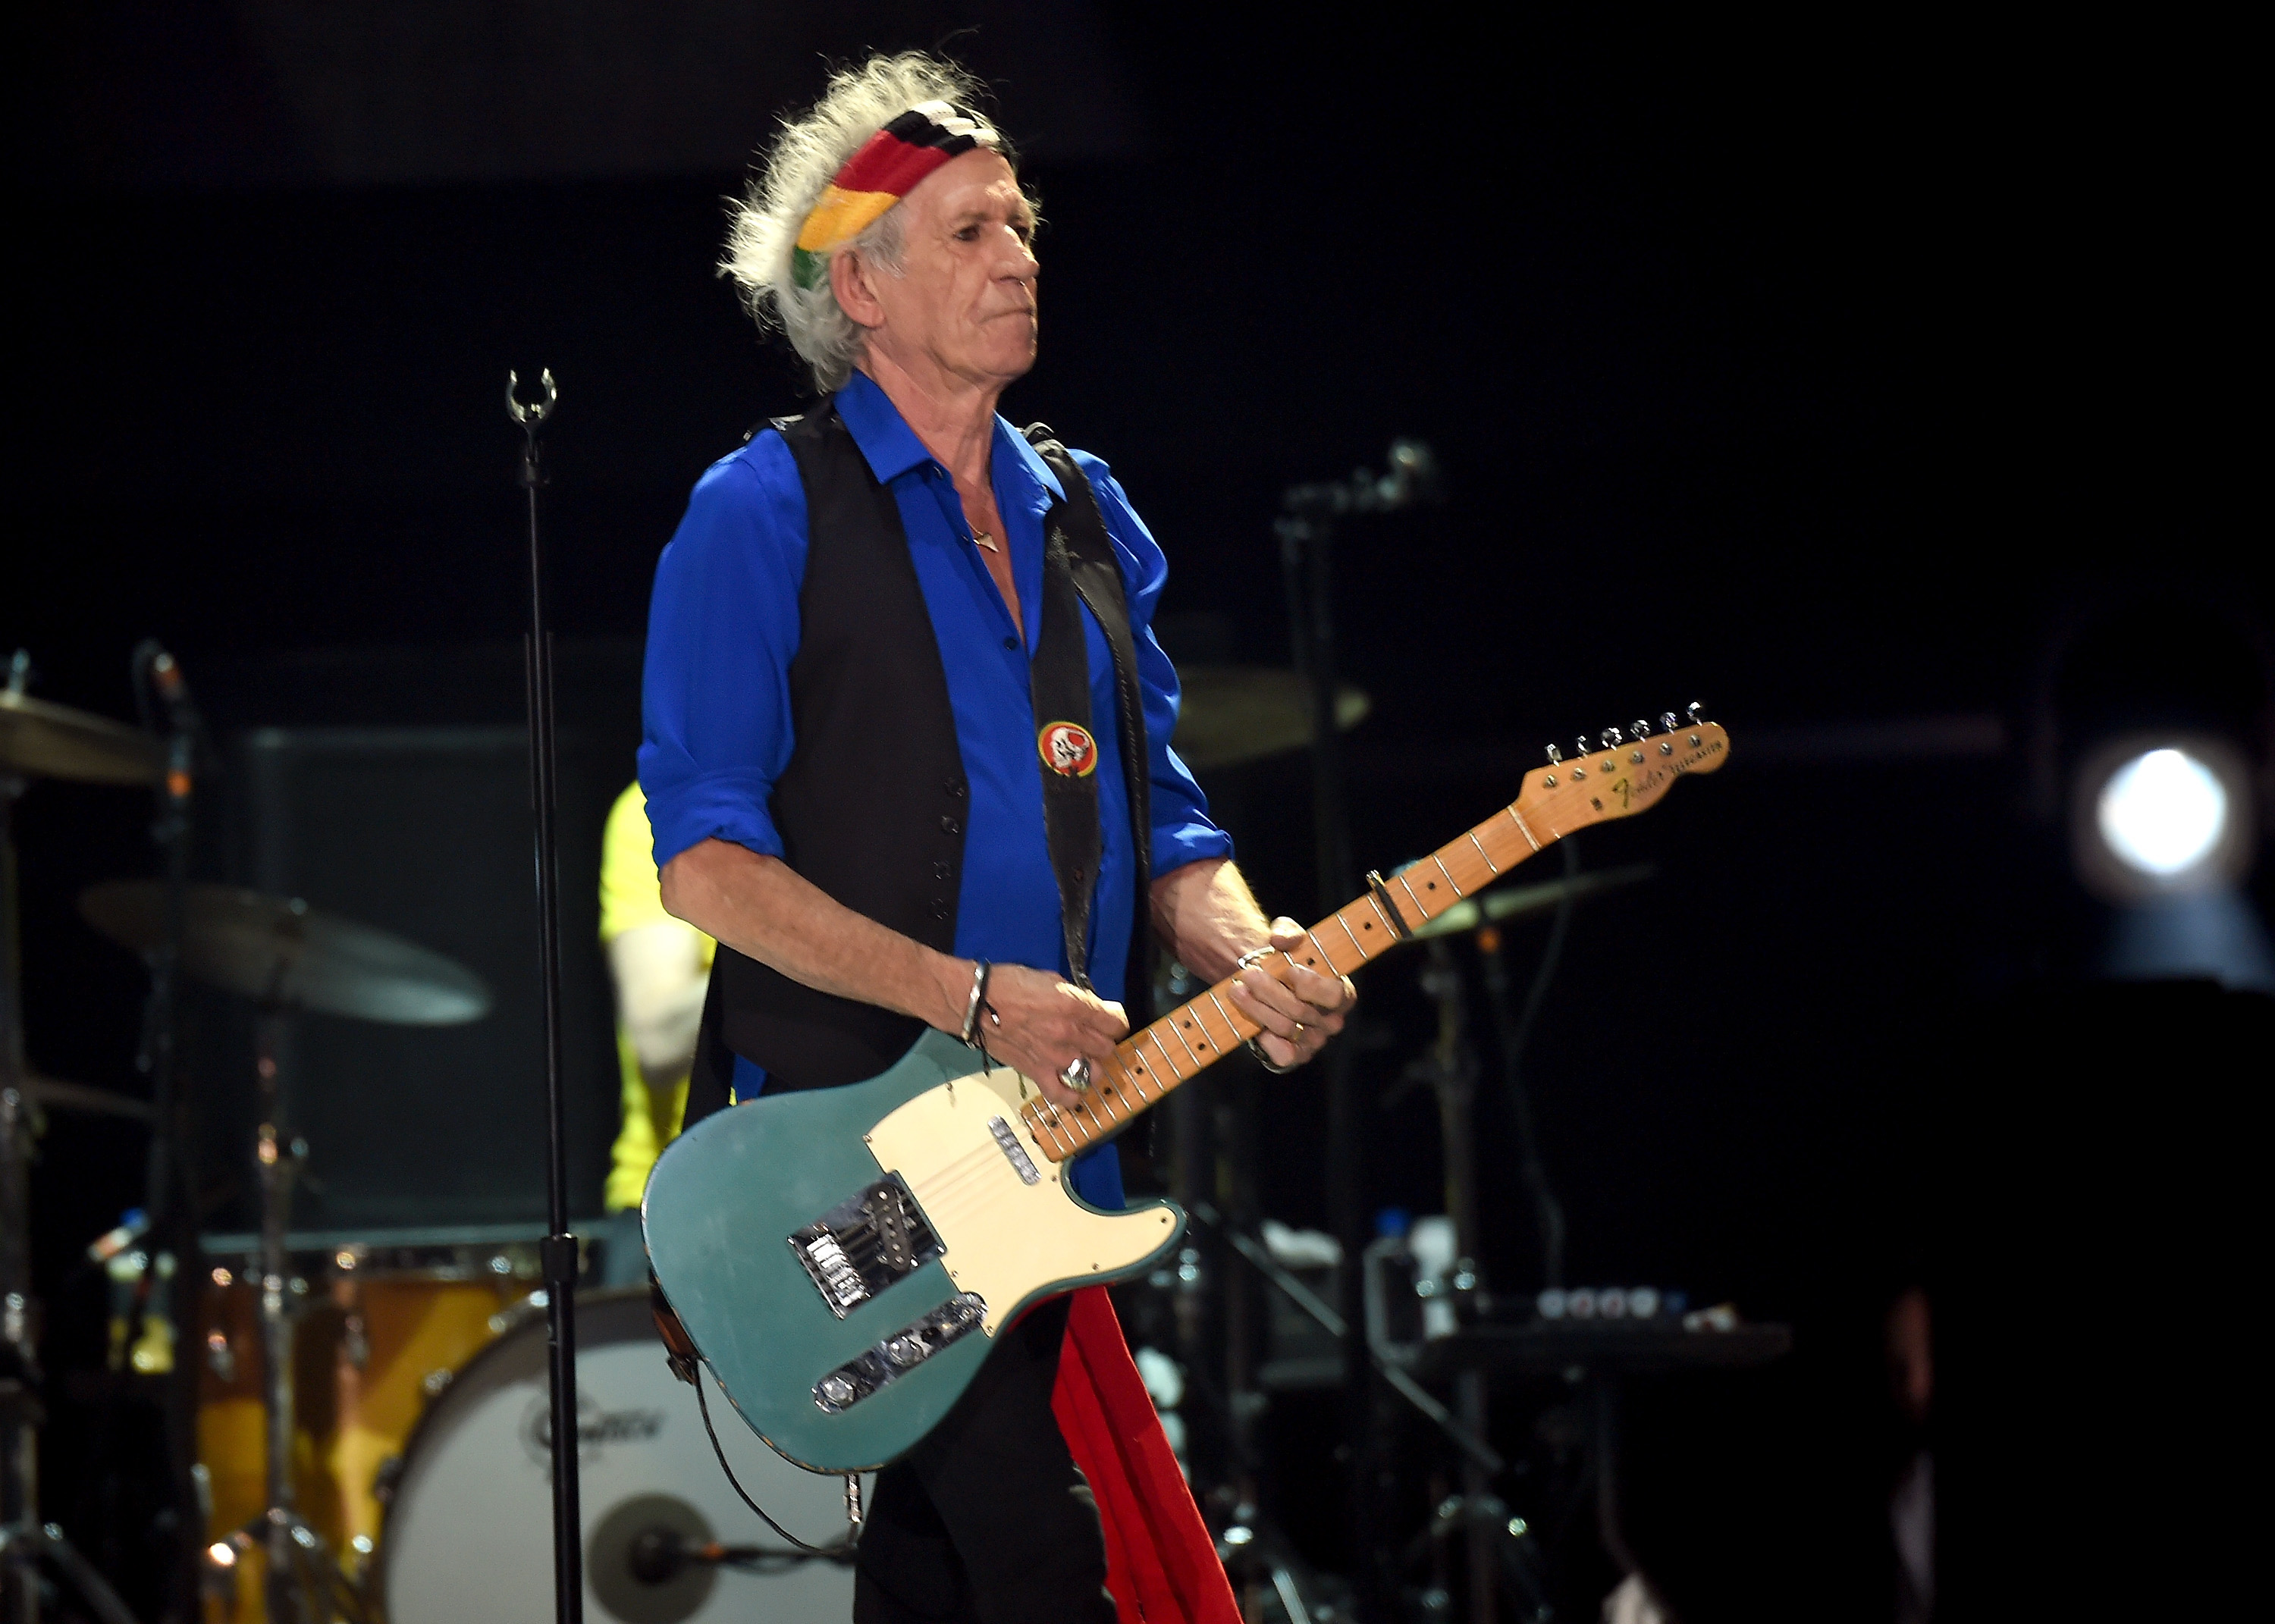 Keith Richards performs with The Rolling Stones at Empire Polo Field in Indio, California